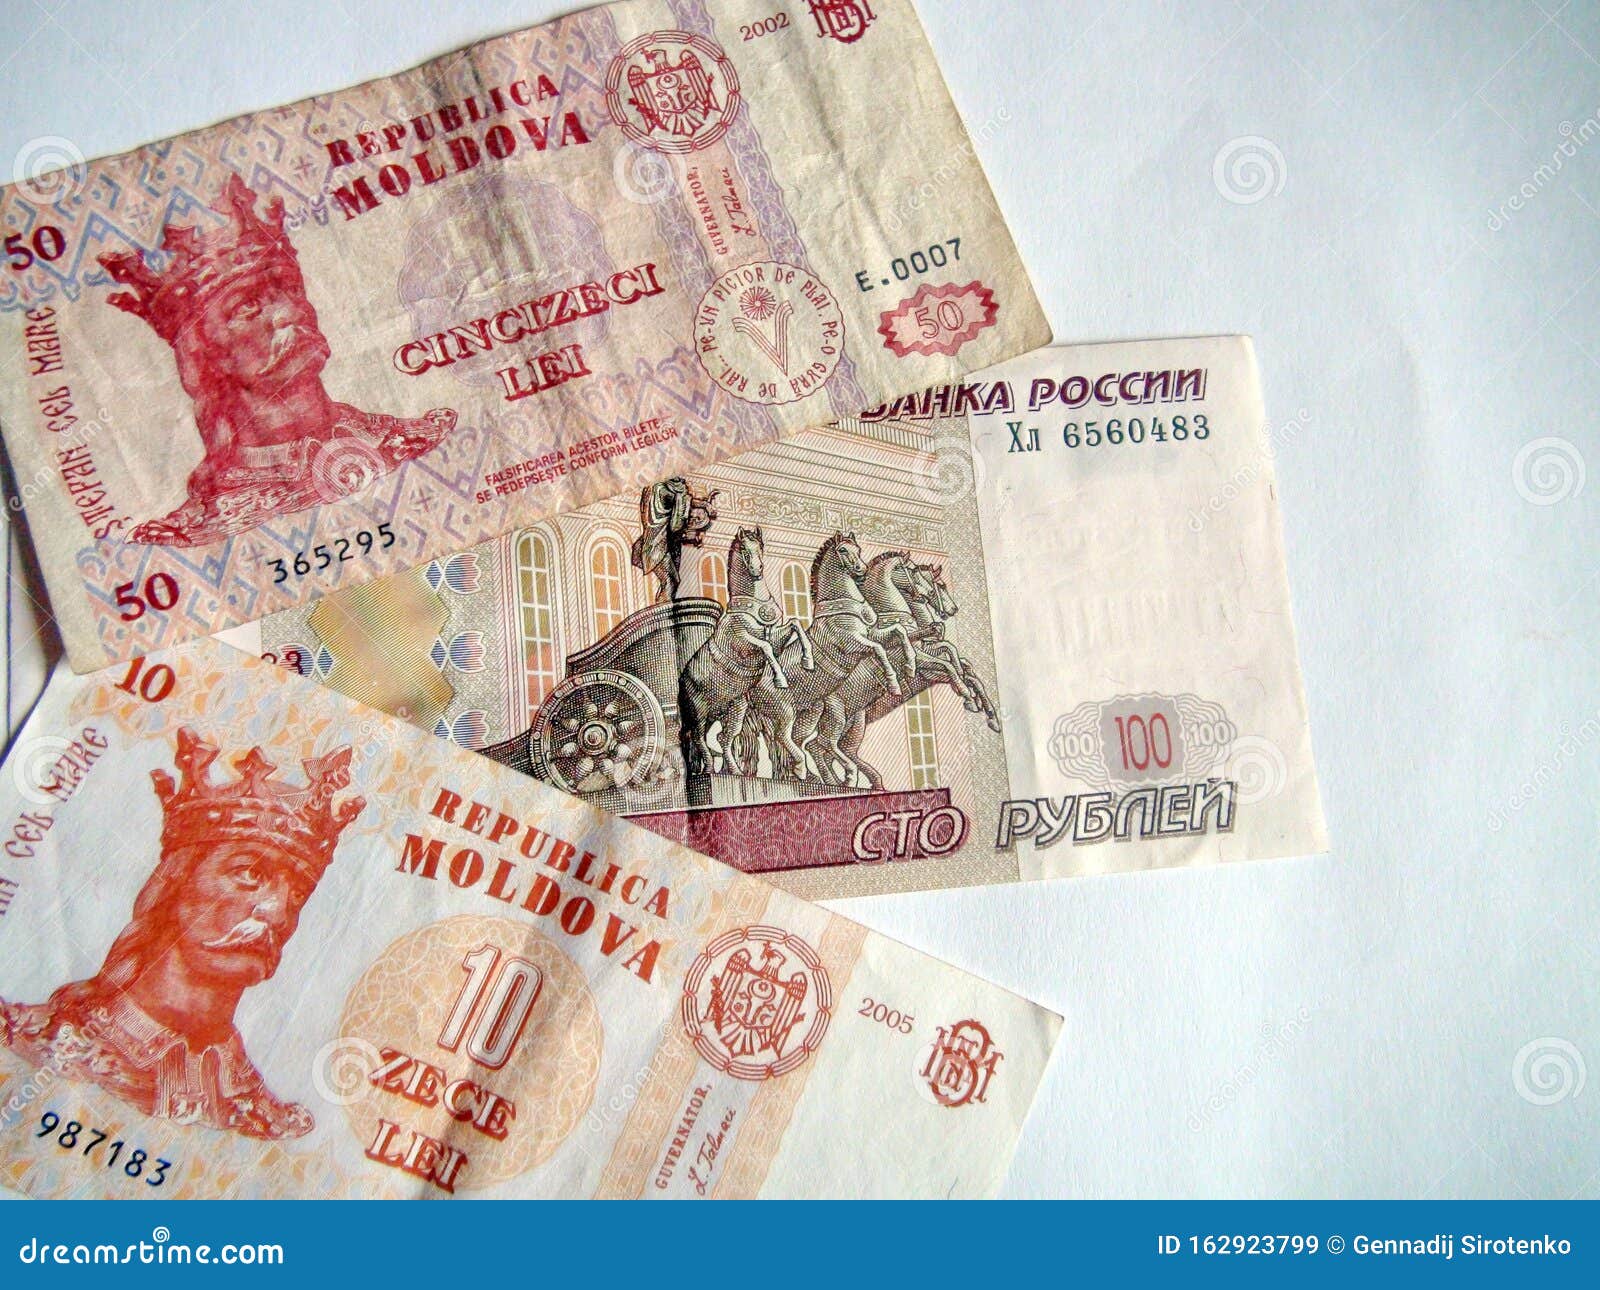 Banknotes Of The World Moldovan Lei Russian Rubles Stock Image Image Of Moldovan Currency 162923799